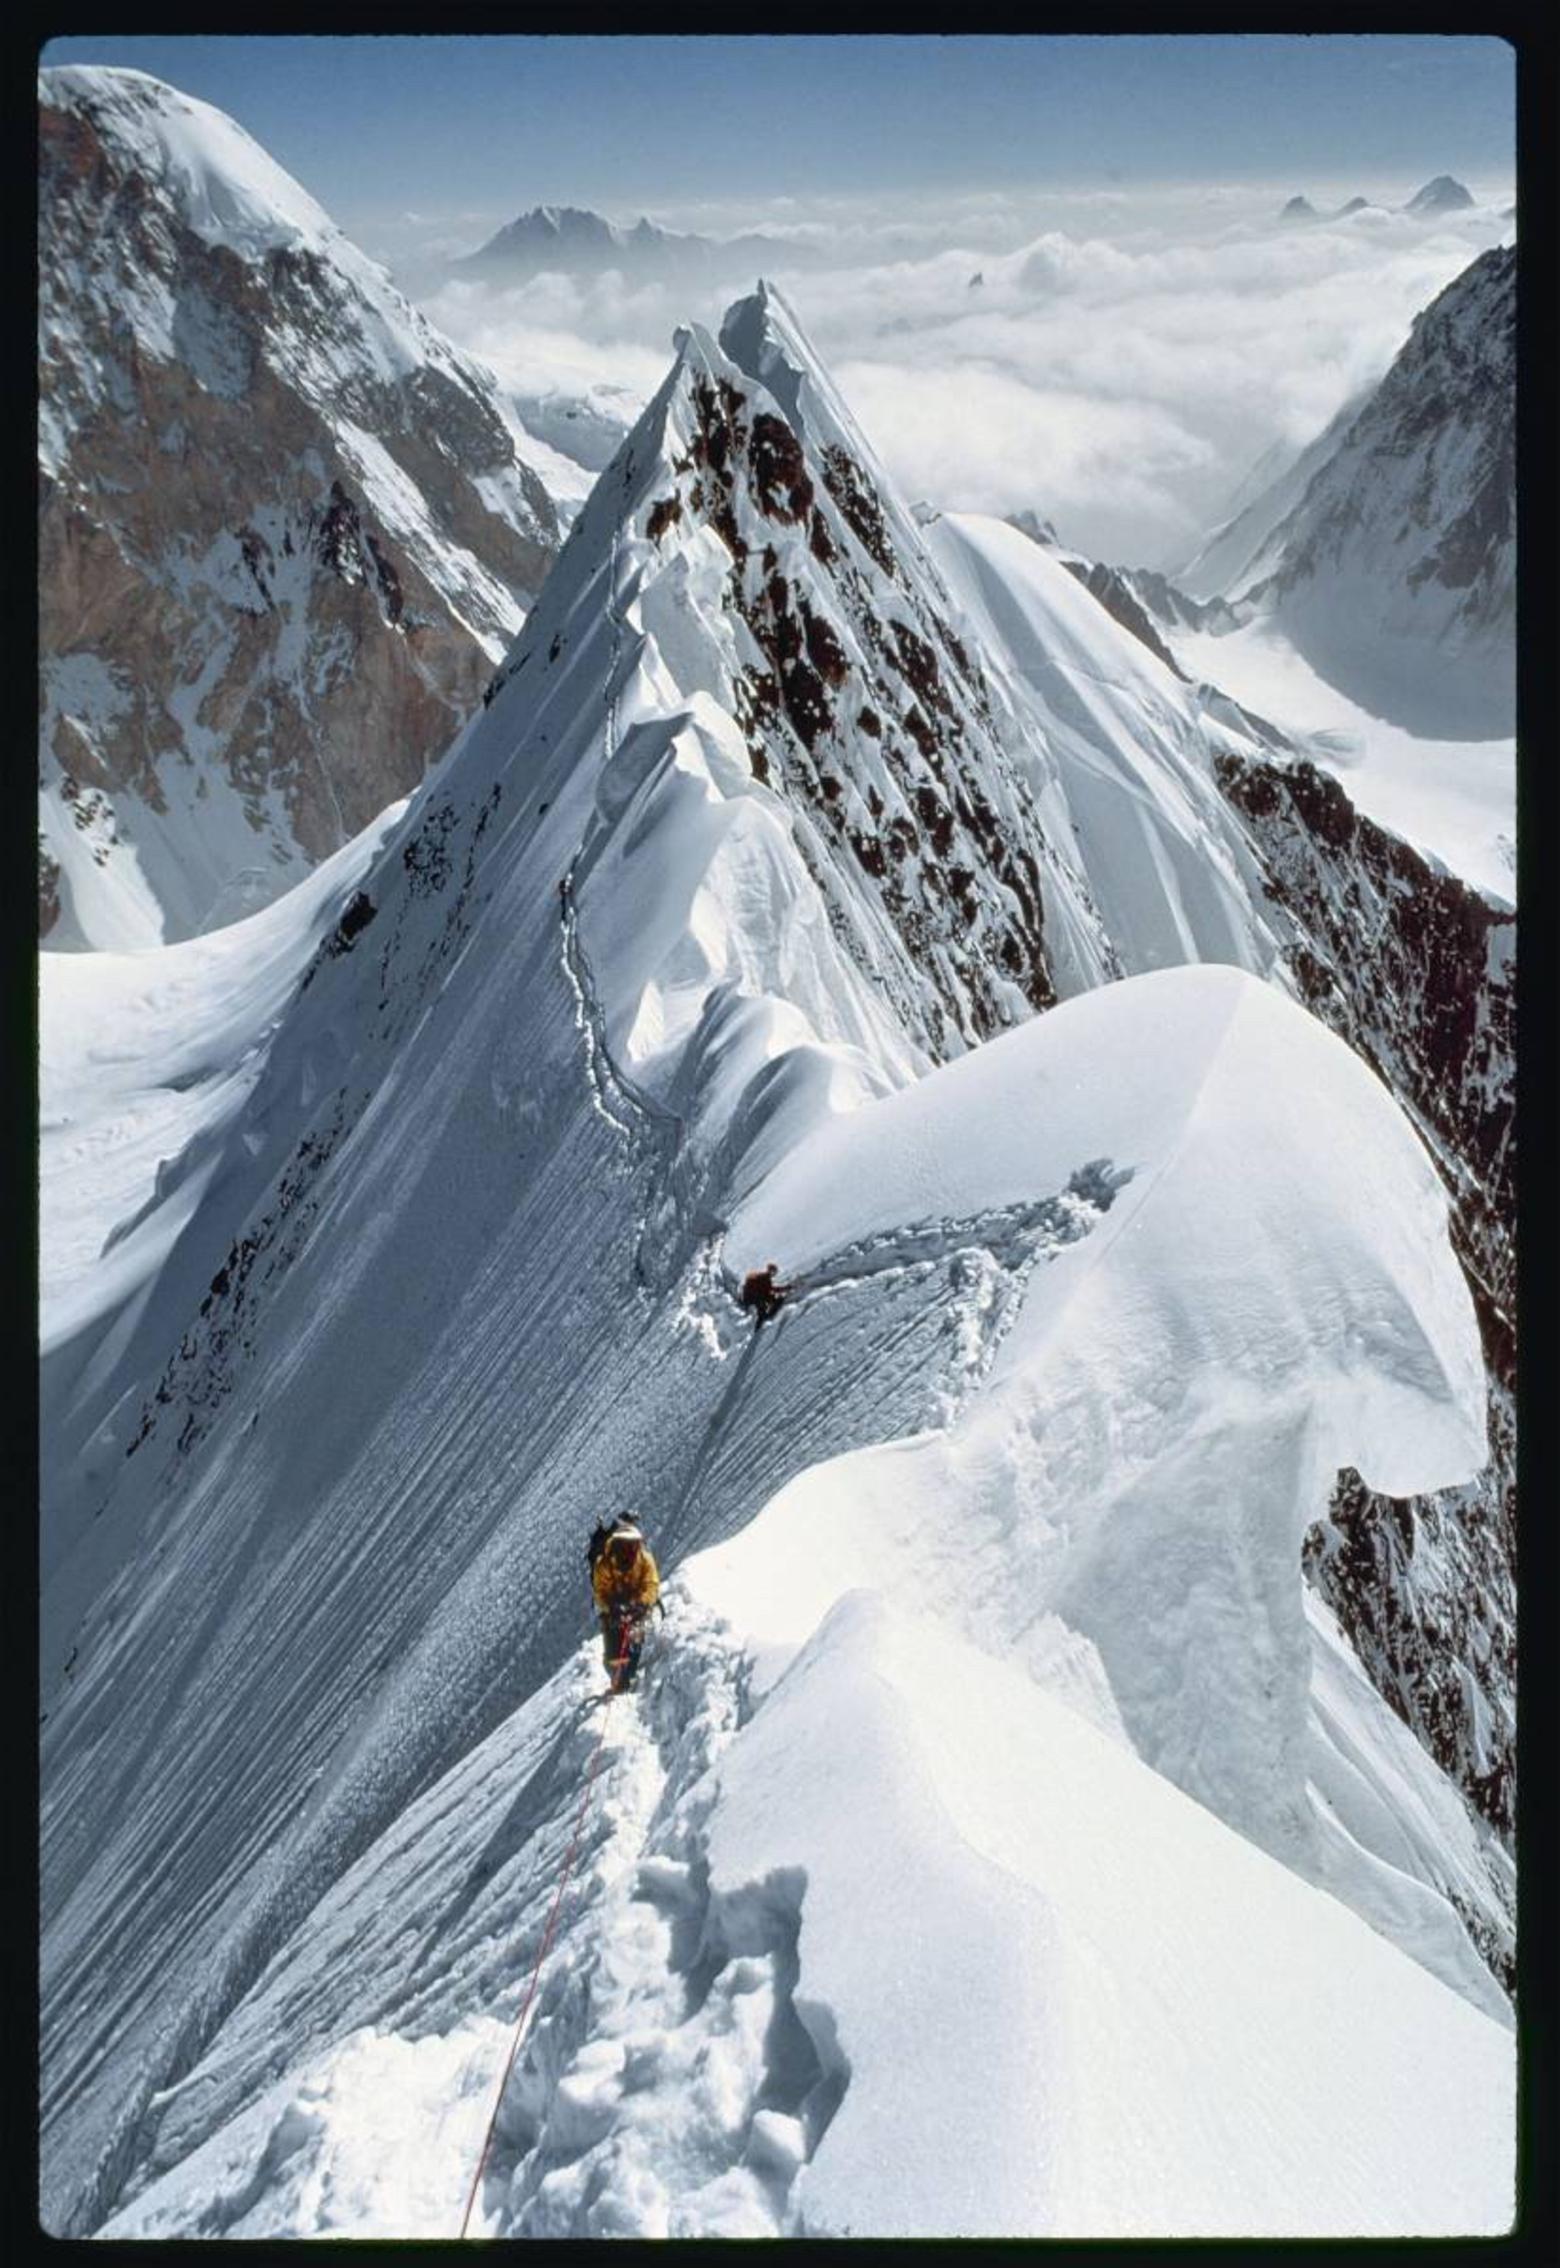 Ridgeway in the lead while scaling the northeast "knife-edge" ridge of K2 four decades ago. Behind him is Lou Reichardt as they they approach Camp IV at 23,000 feet. Photo courtesy John Roskelley.